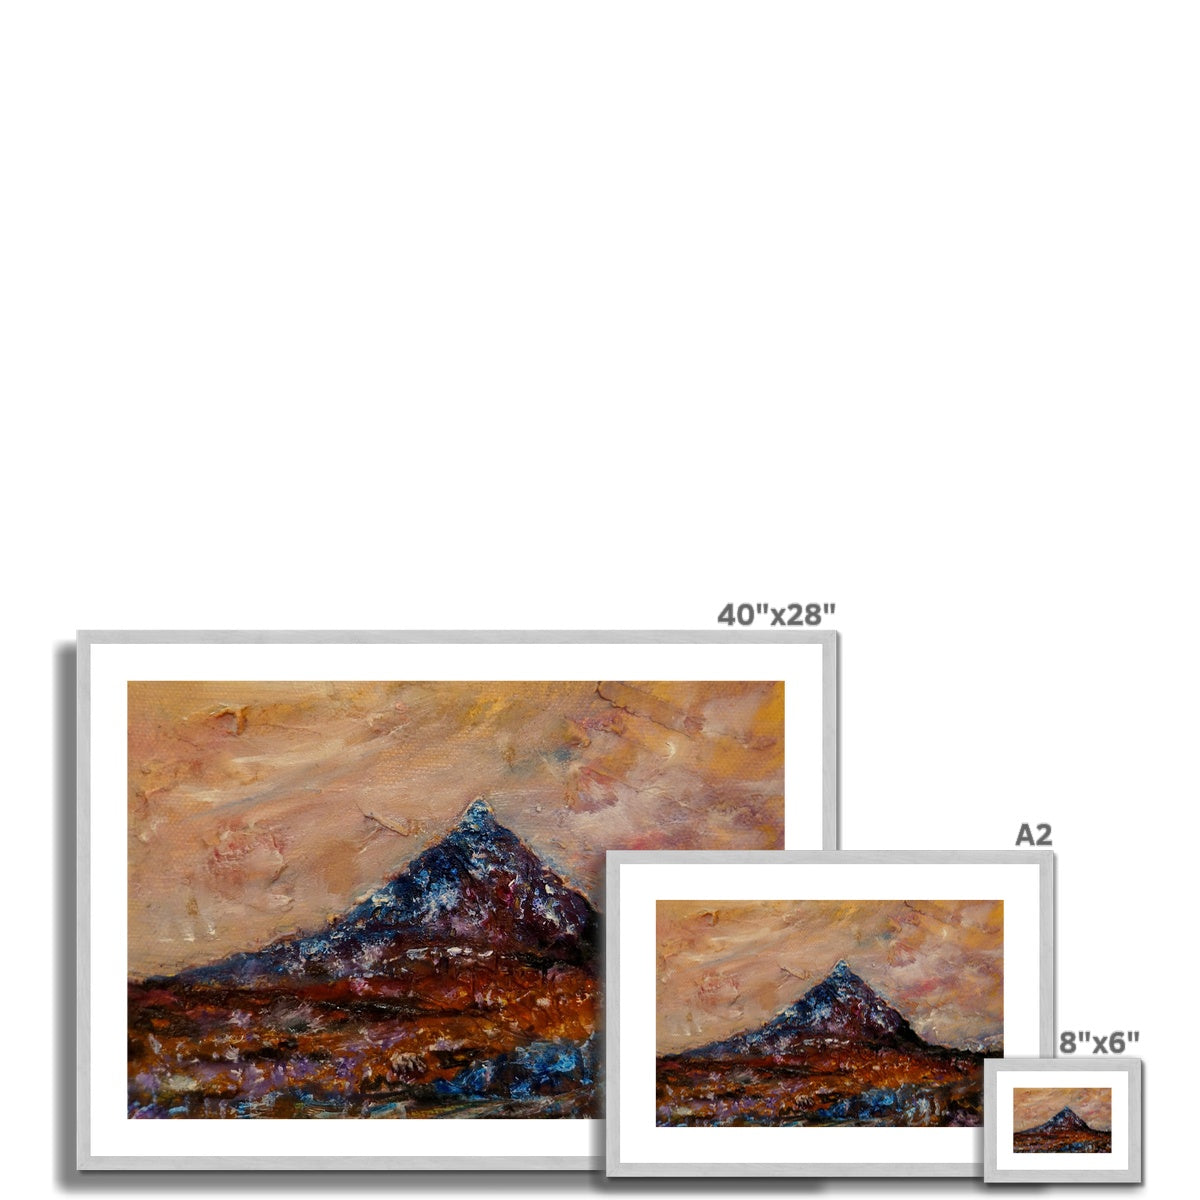 Buachaille Etive Mòr Painting | Antique Framed & Mounted Prints From Scotland-Antique Framed & Mounted Prints-Glencoe Art Gallery-Paintings, Prints, Homeware, Art Gifts From Scotland By Scottish Artist Kevin Hunter